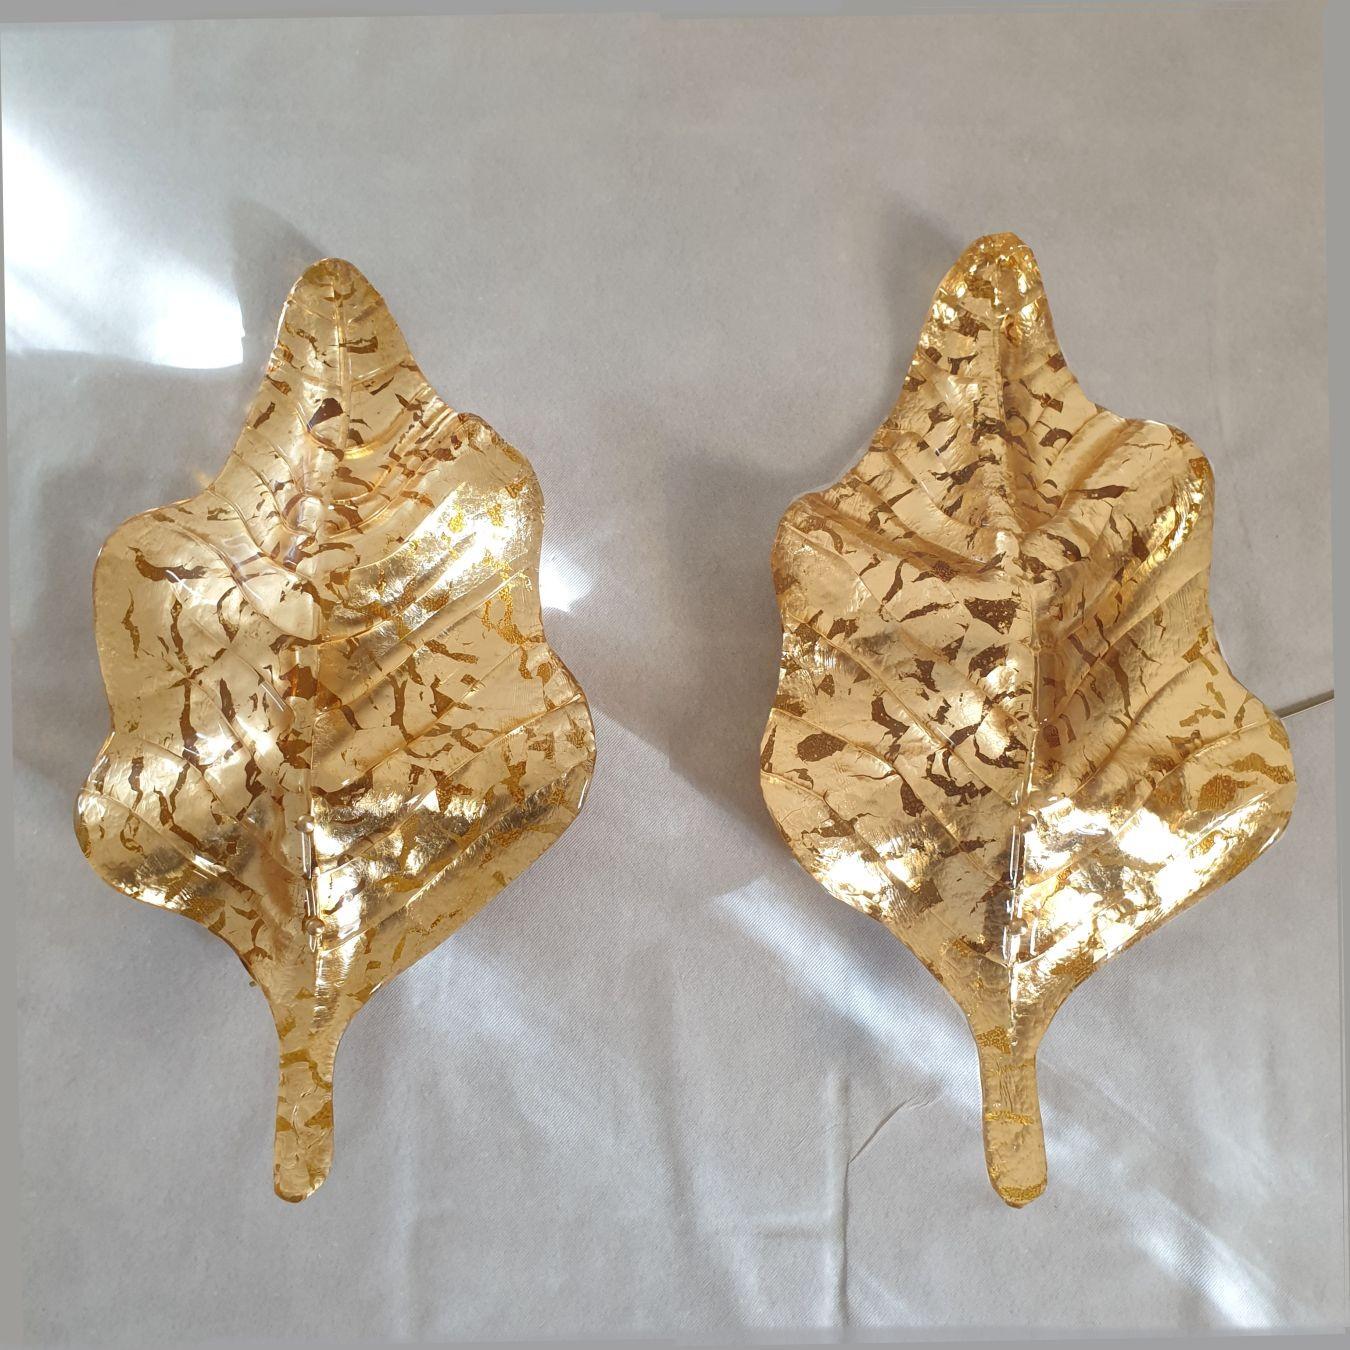 Pair of large Mid-Century Modern gold Murano glass sconces, Mazzega style, Italy 1980s.
Two pairs of sconces available - Set of four sconces.
Sold and priced by pair.
The large Italian sconces are made of a handmade Murano glass, with an amber color